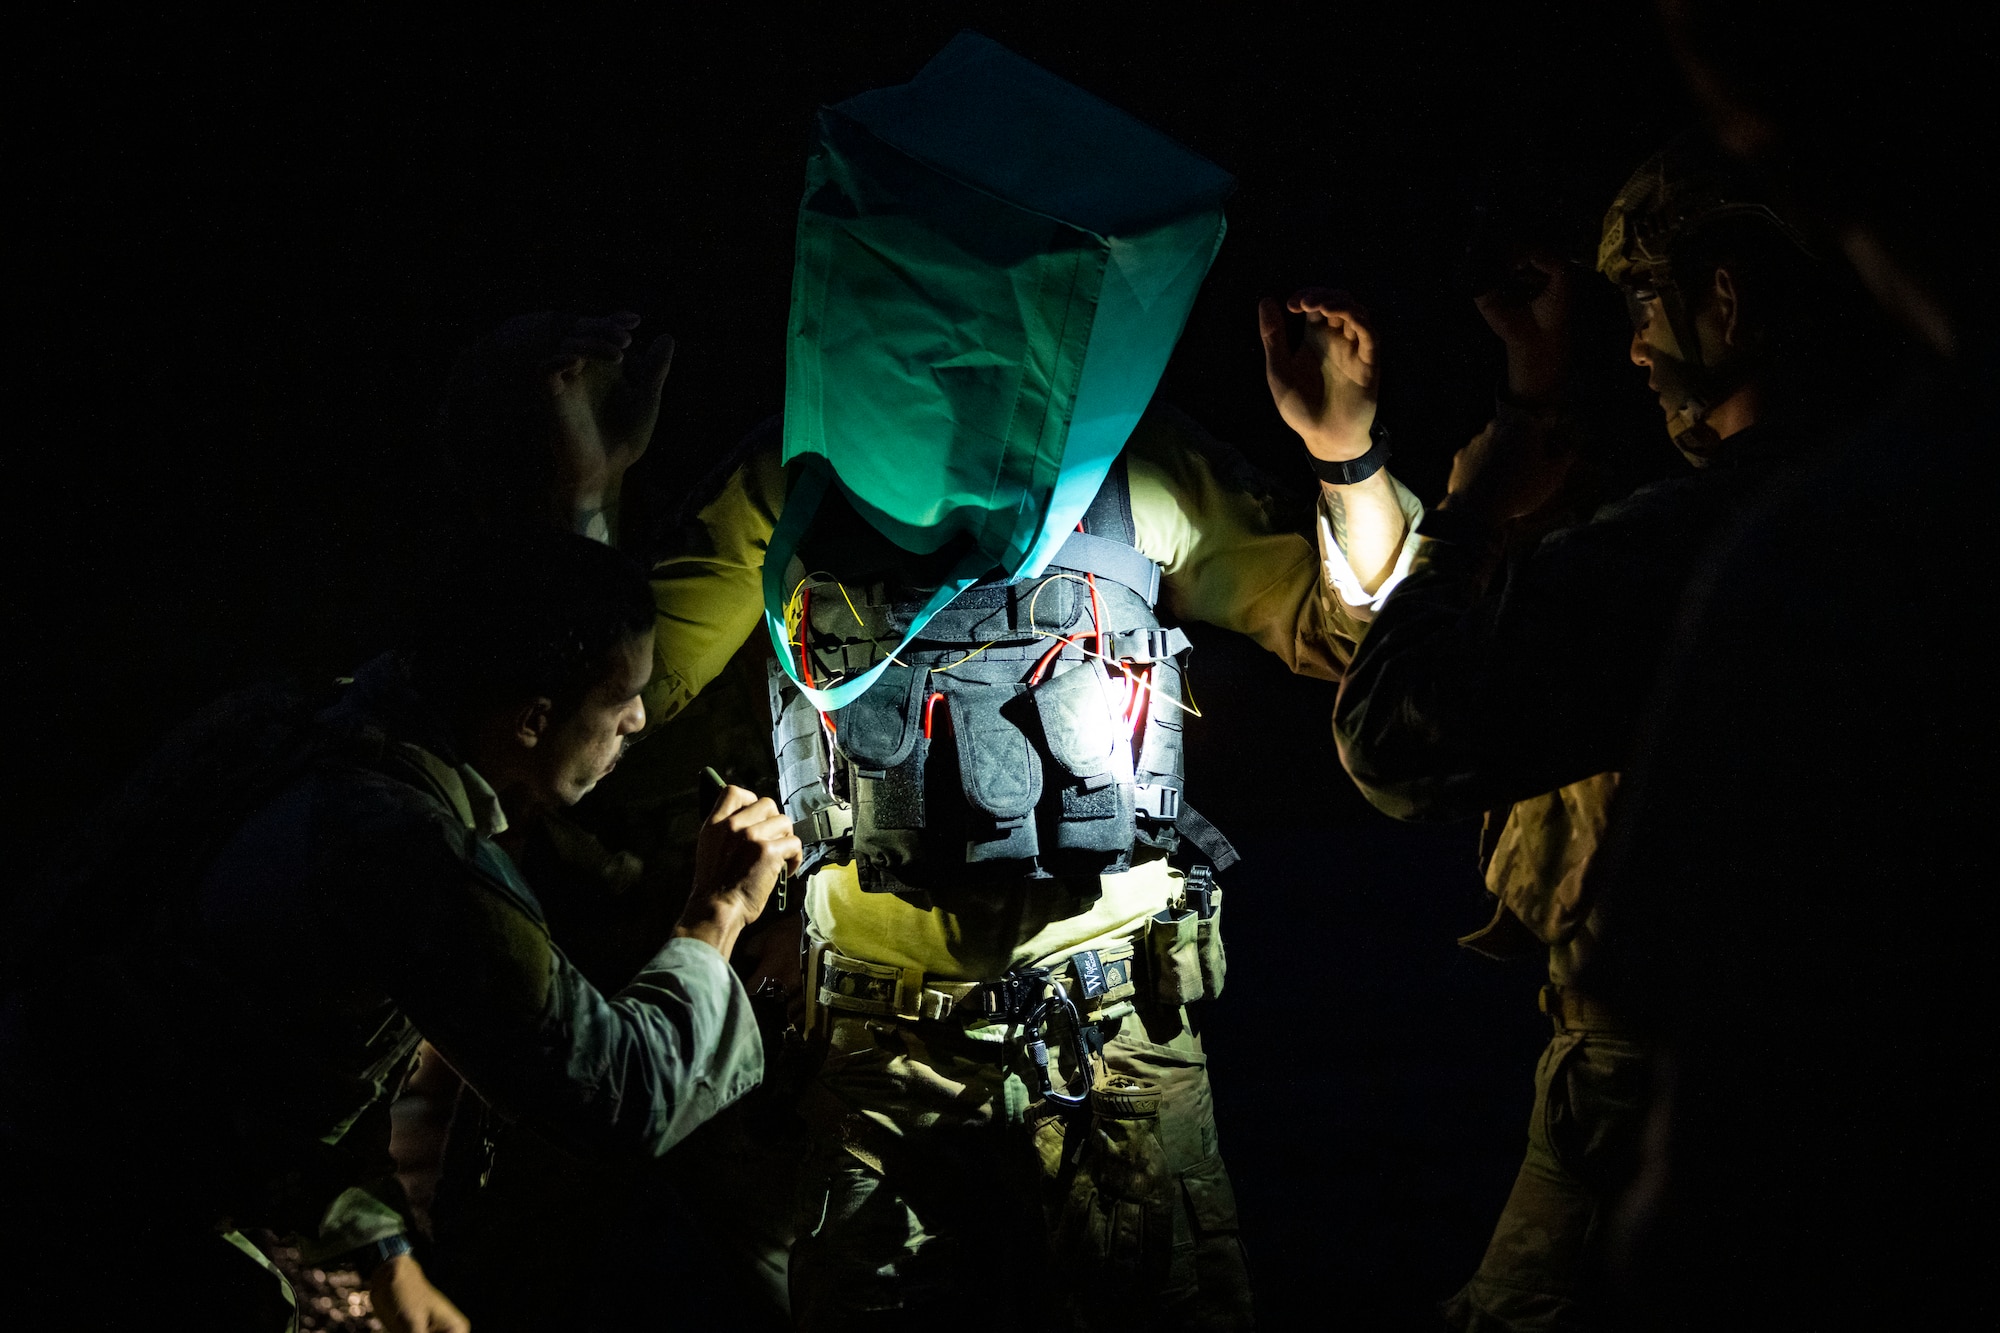 U.S. military members hold flashlights while disarming a suicide vest on a volunteer.